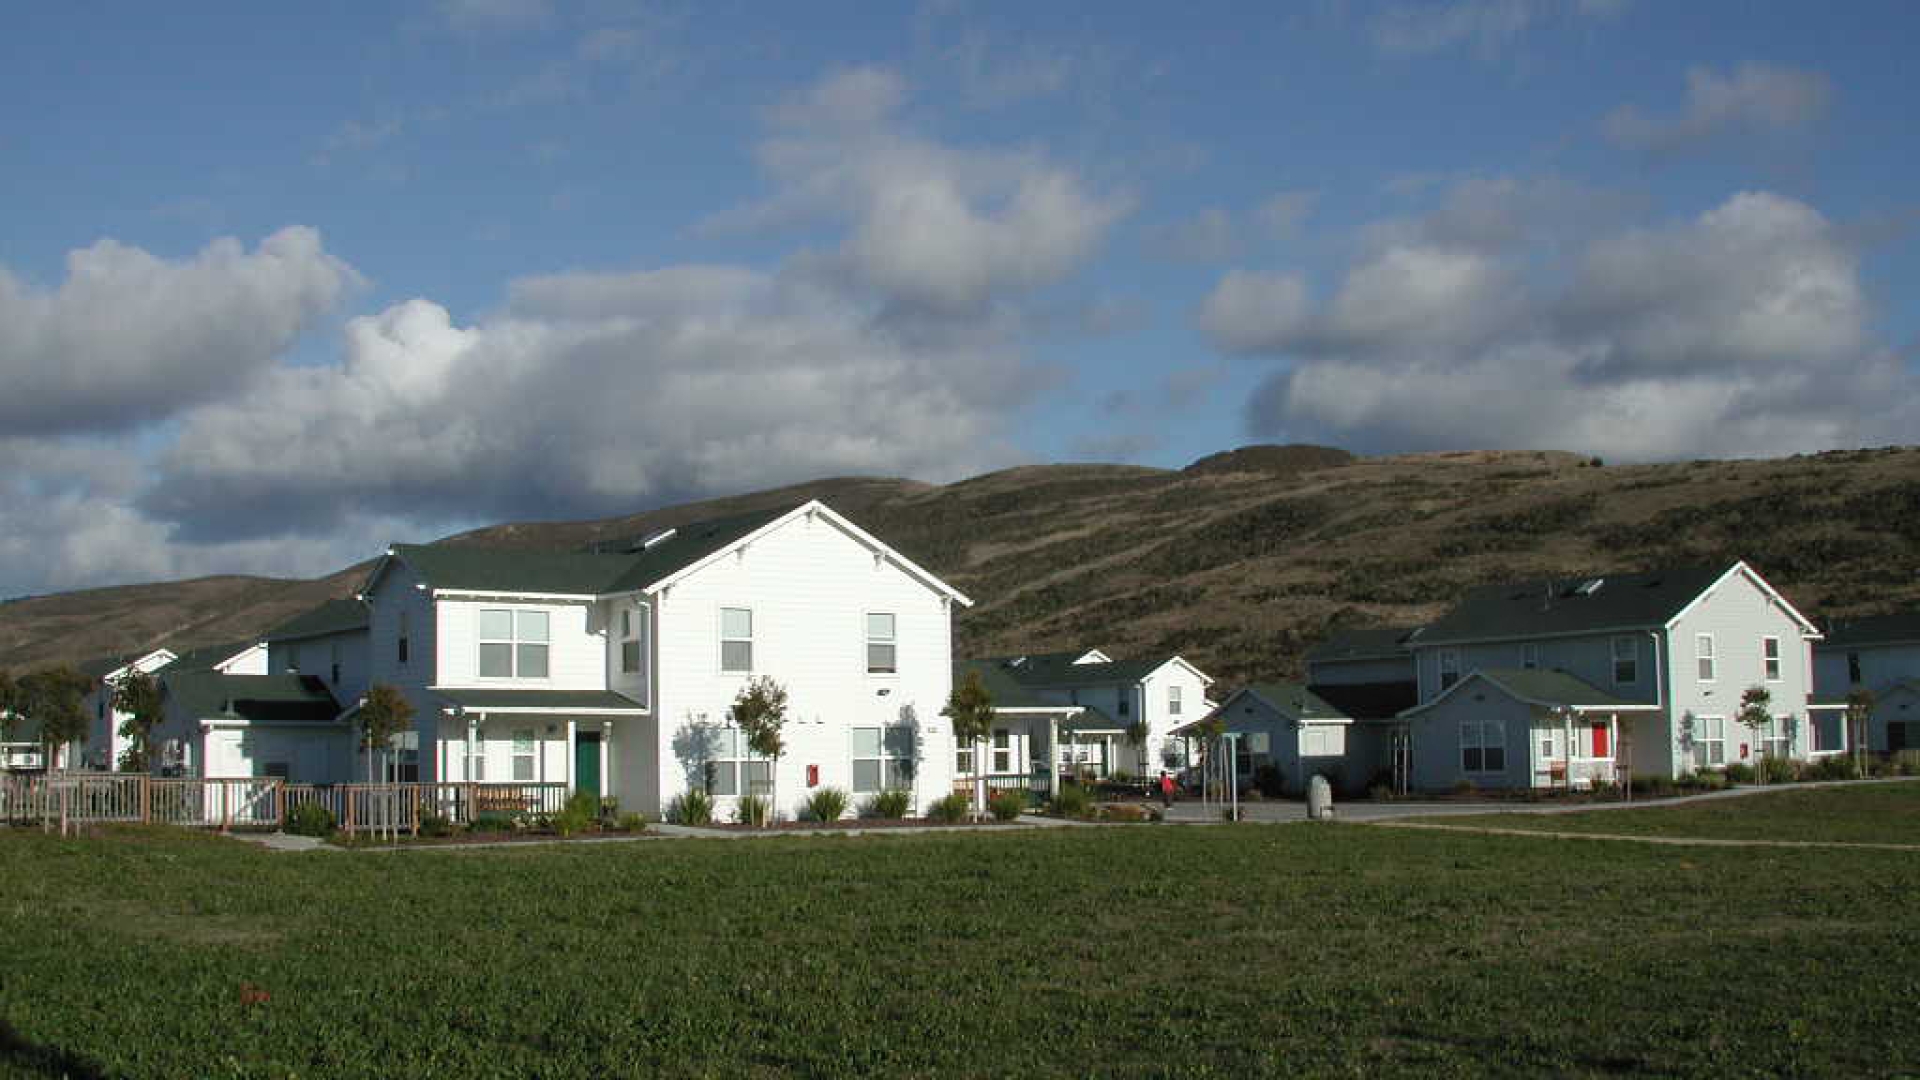 View of the grass area with Moonridge Village in Santa Cruz, California in the background.